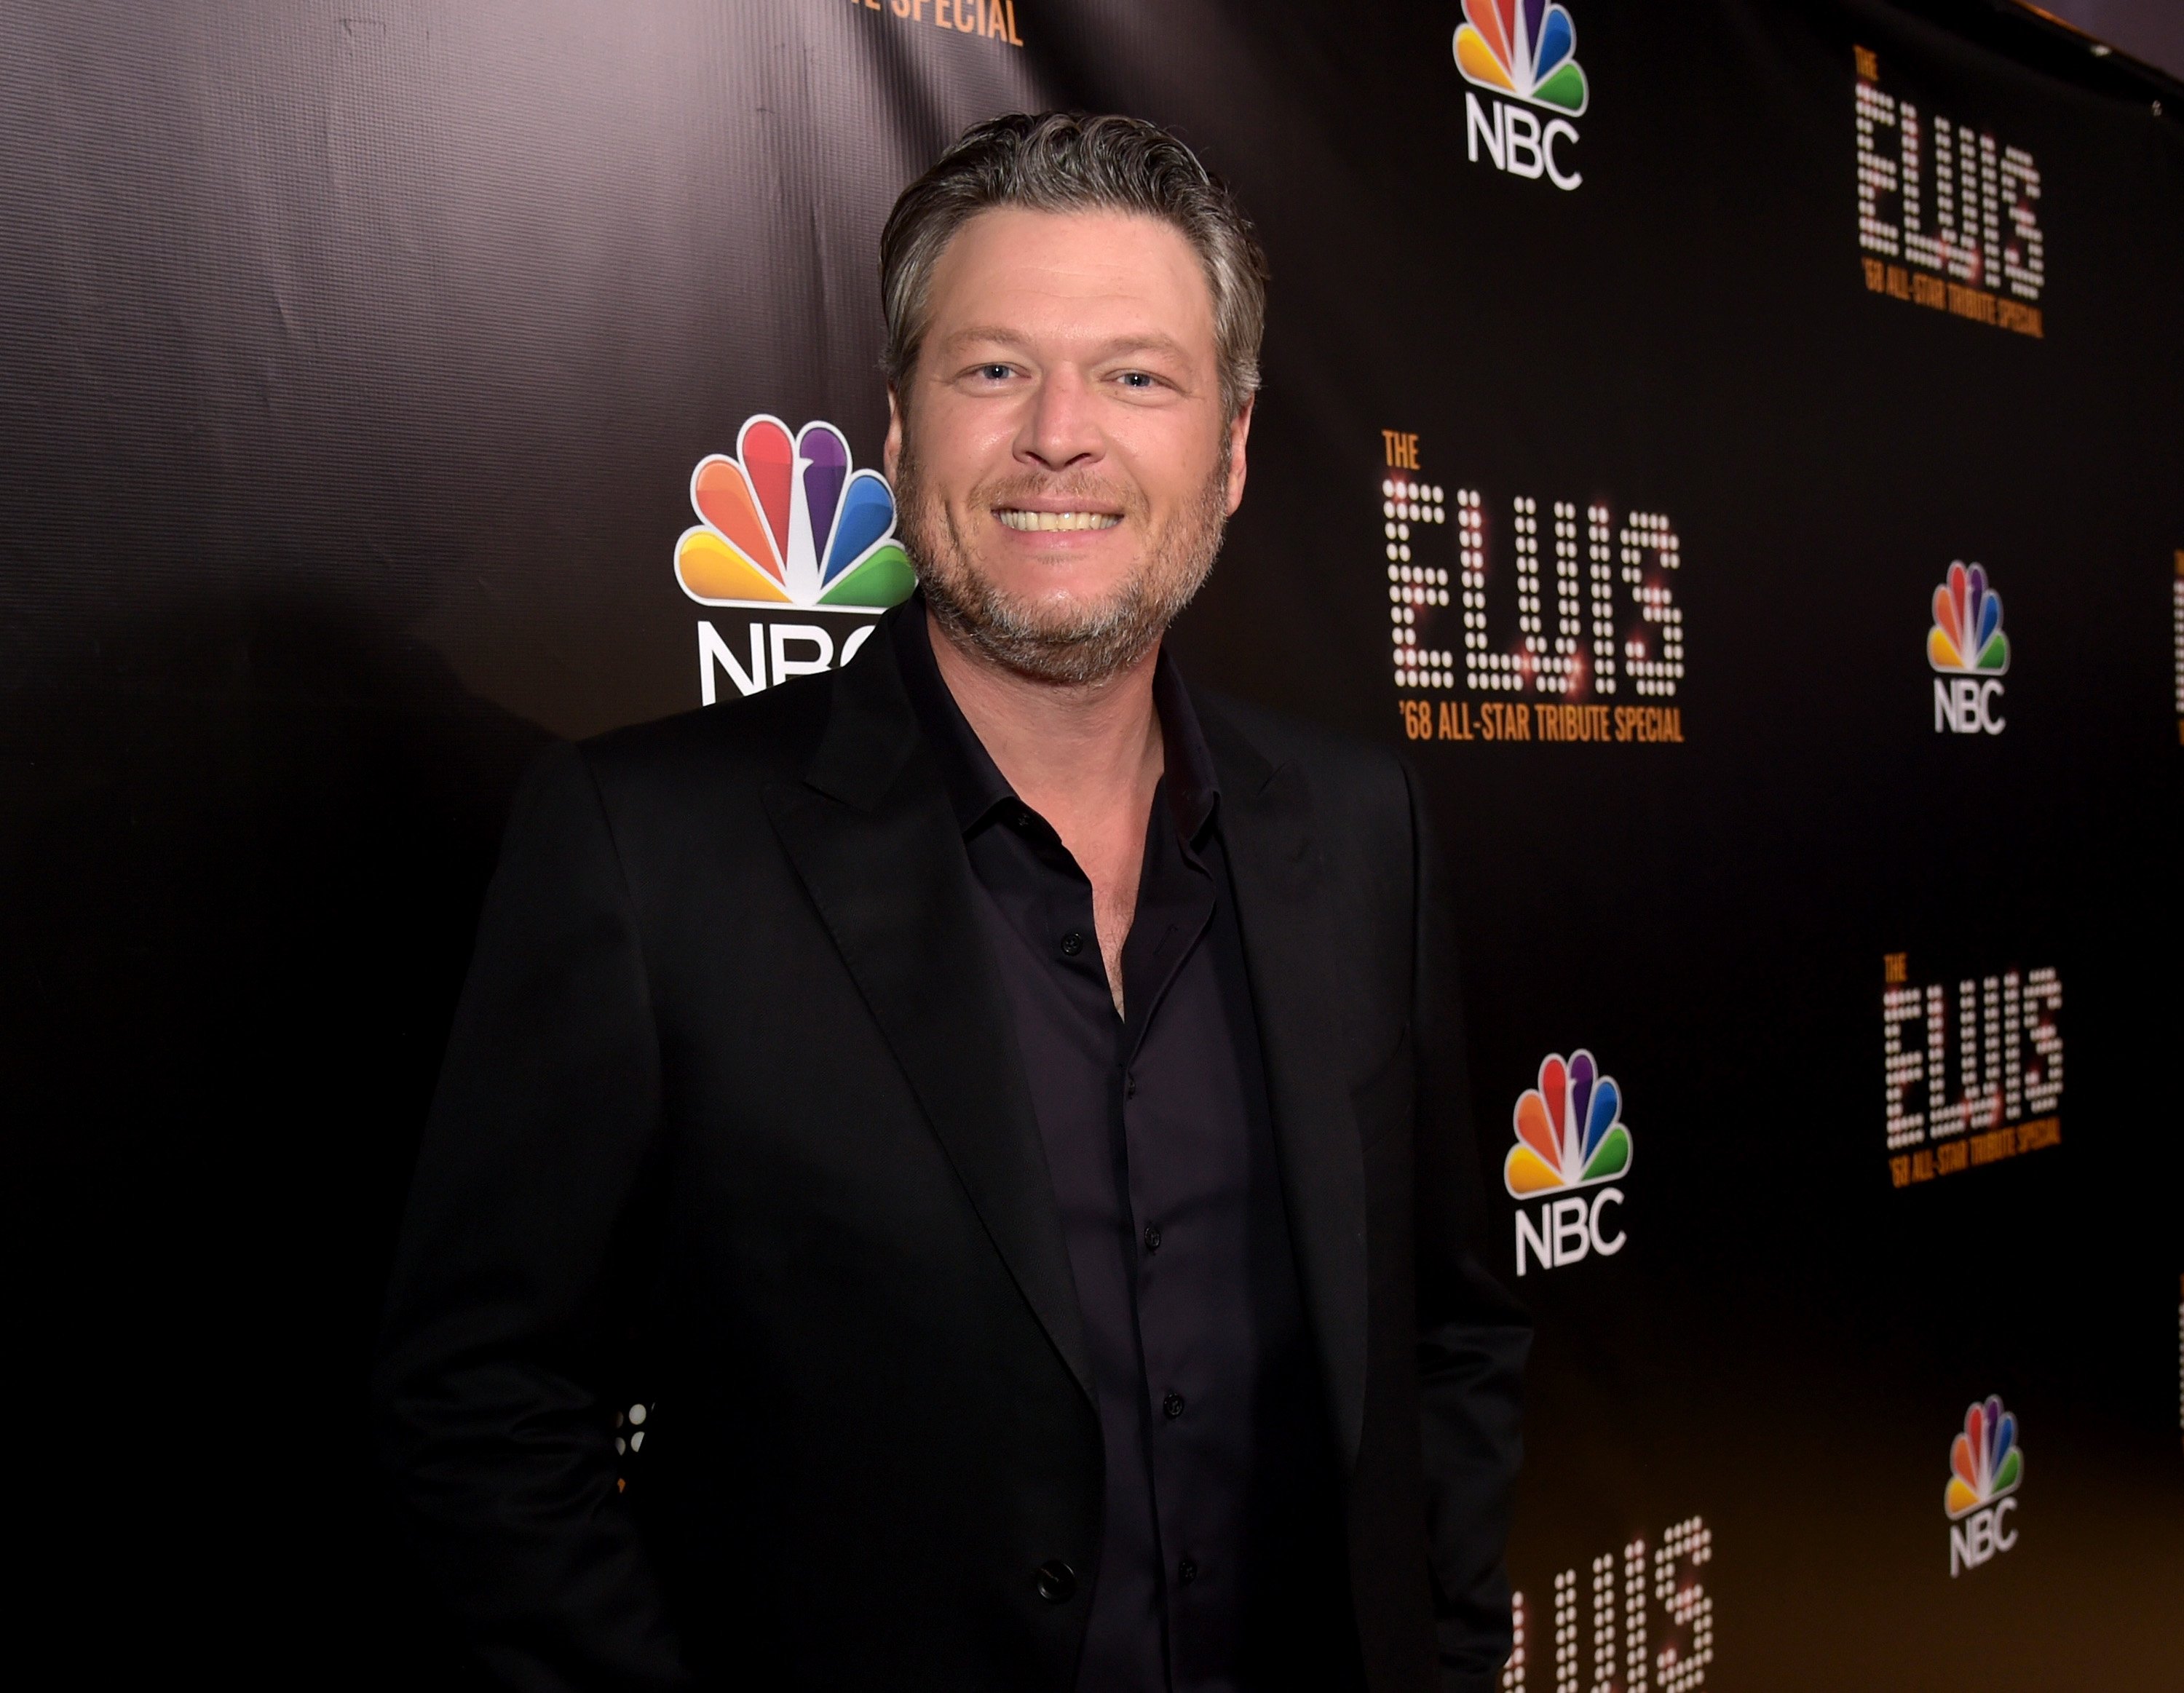 Blake Shelton at The Elvis '68 All-Star Tribute Special at Universal Studios on October 11, 2018 | Photo: GettyImages